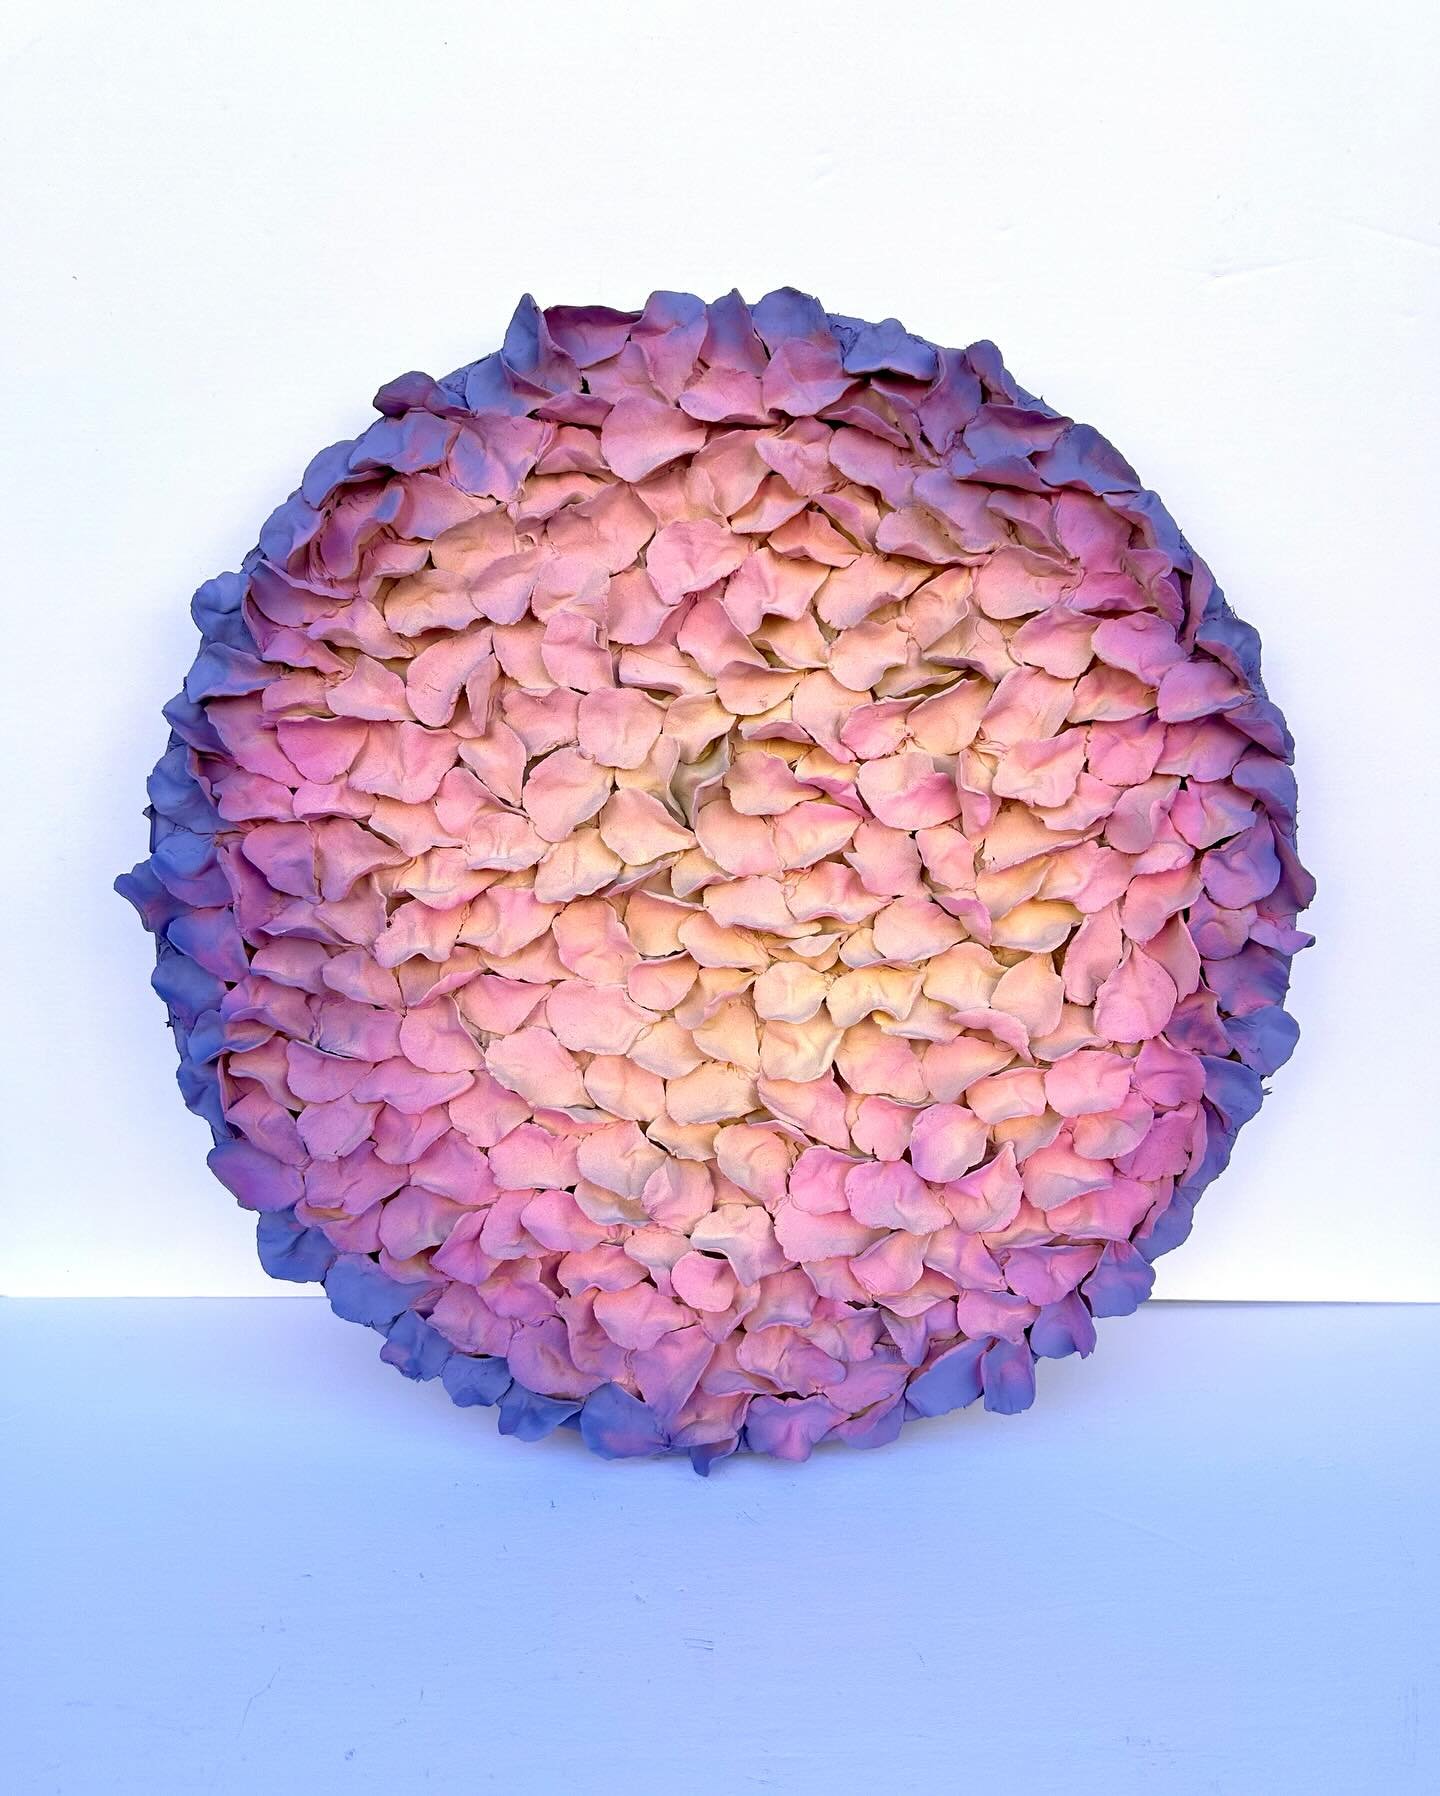 Purple Object 1 [Hydrangea] is my experimental sculptural artwork made from paper clay. It&rsquo;s part of the &ldquo;Touch&rdquo; show which opened this weekend at @art150jc 

I made this piece a few months ago, while still at my old studio. Working